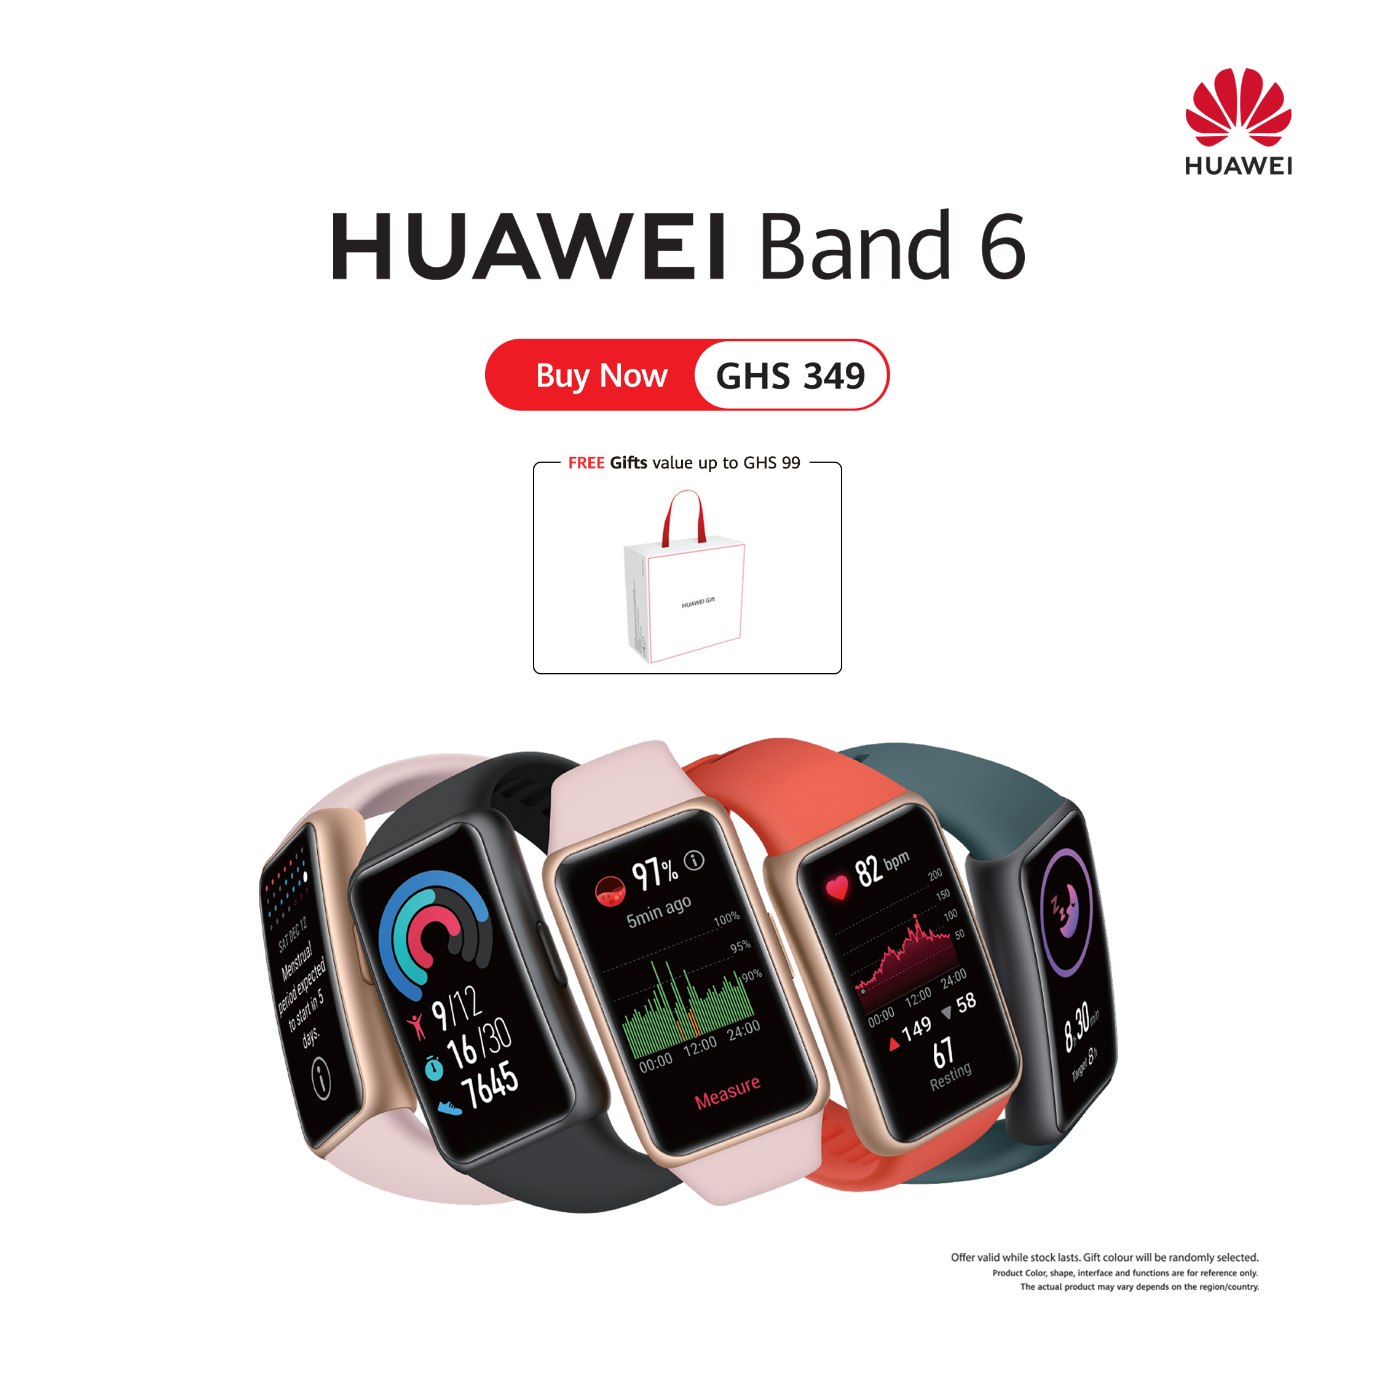 Huawei's all new smart band, Huawei Band 6 brings together Key smartwatch features and doesn’t break the bank!